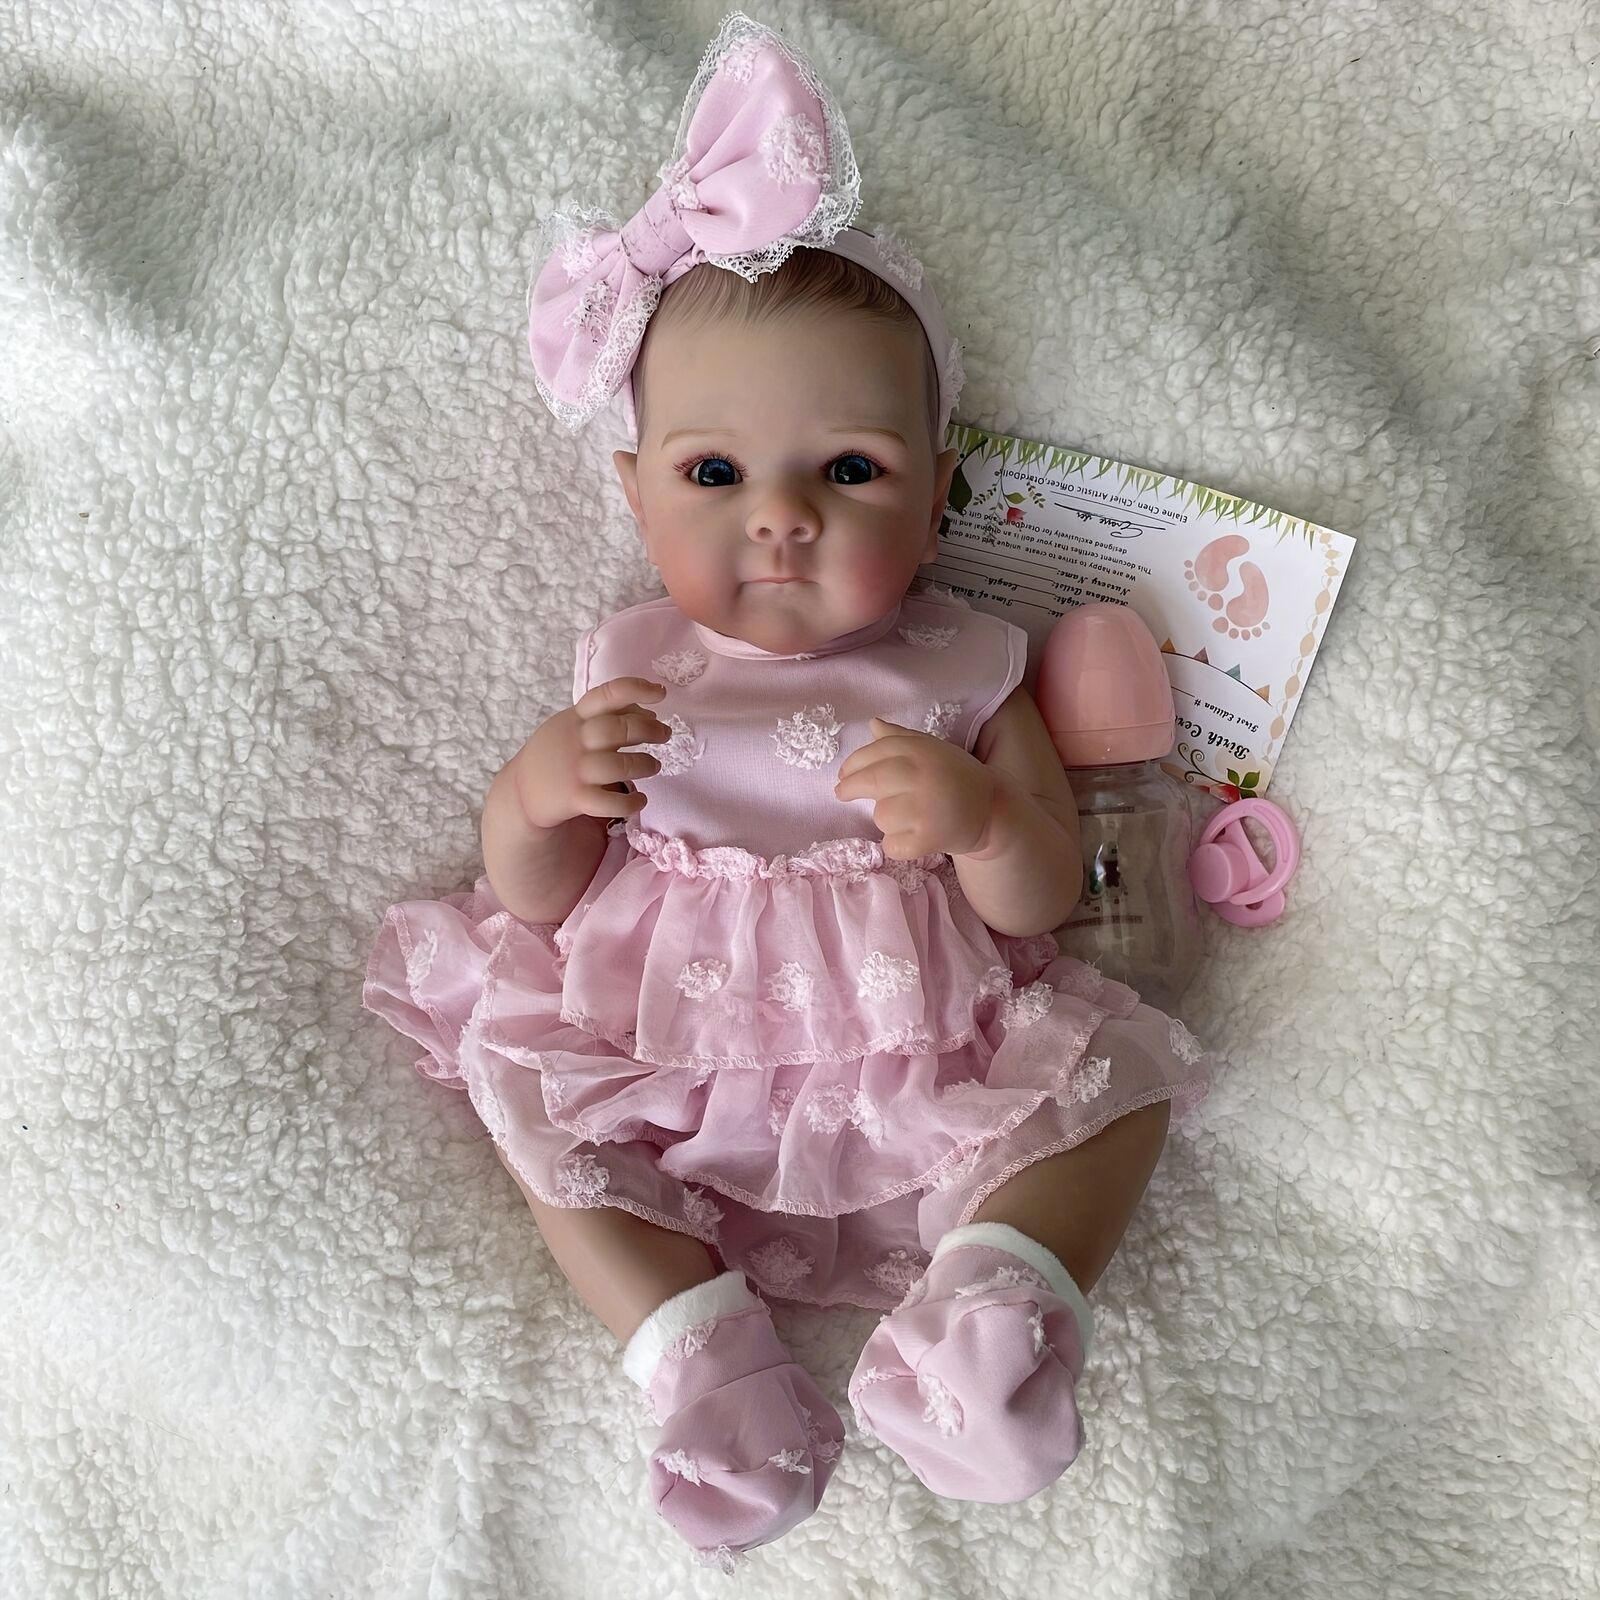 Lifelike Reborn Doll - Whole Body Silicone, Hand-Painted Features & Hair